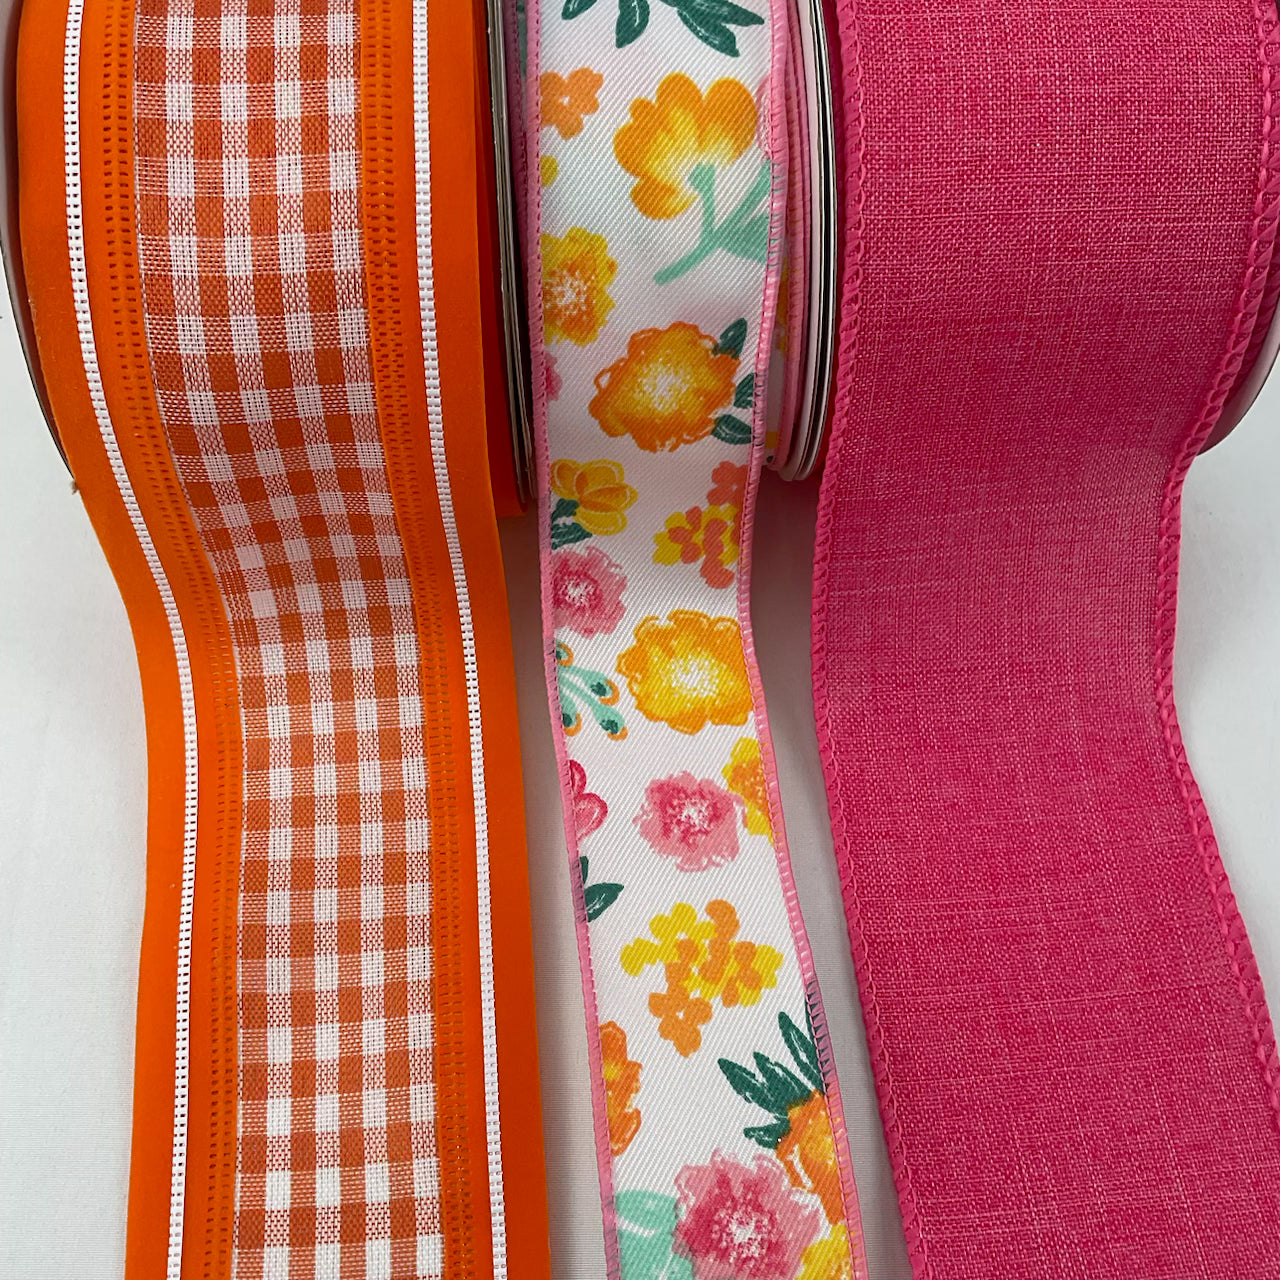 Hot pink and orange brights floral bow bundle x 3 wired ribbons